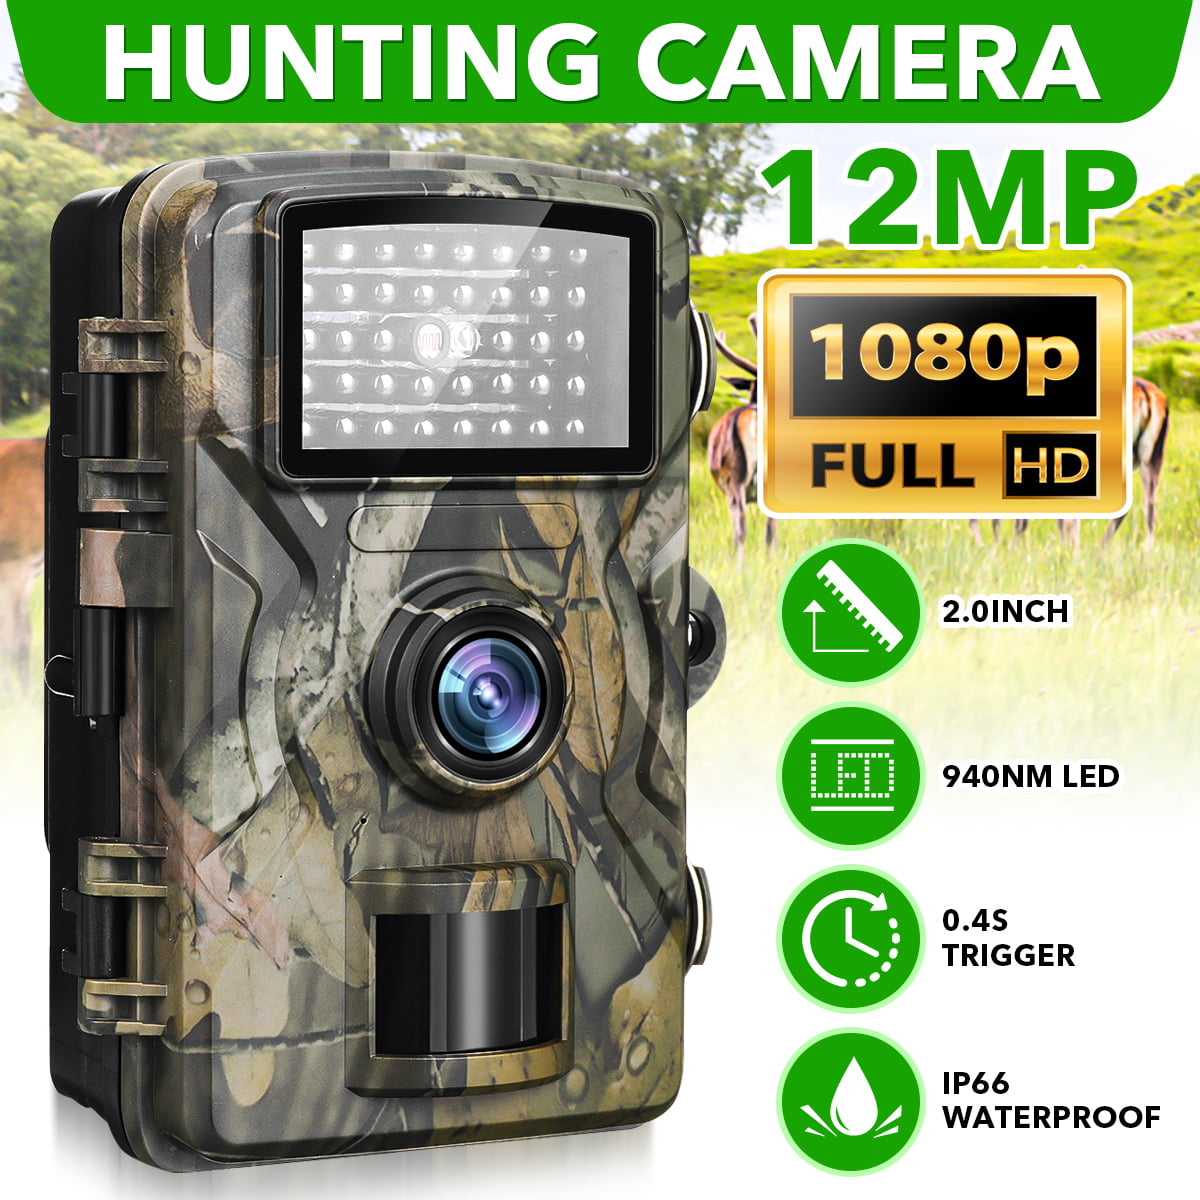 Wildlife Trail Camera 12MP 1080P FHD Infrared Hunting Game Deer Video Cam M5L6 